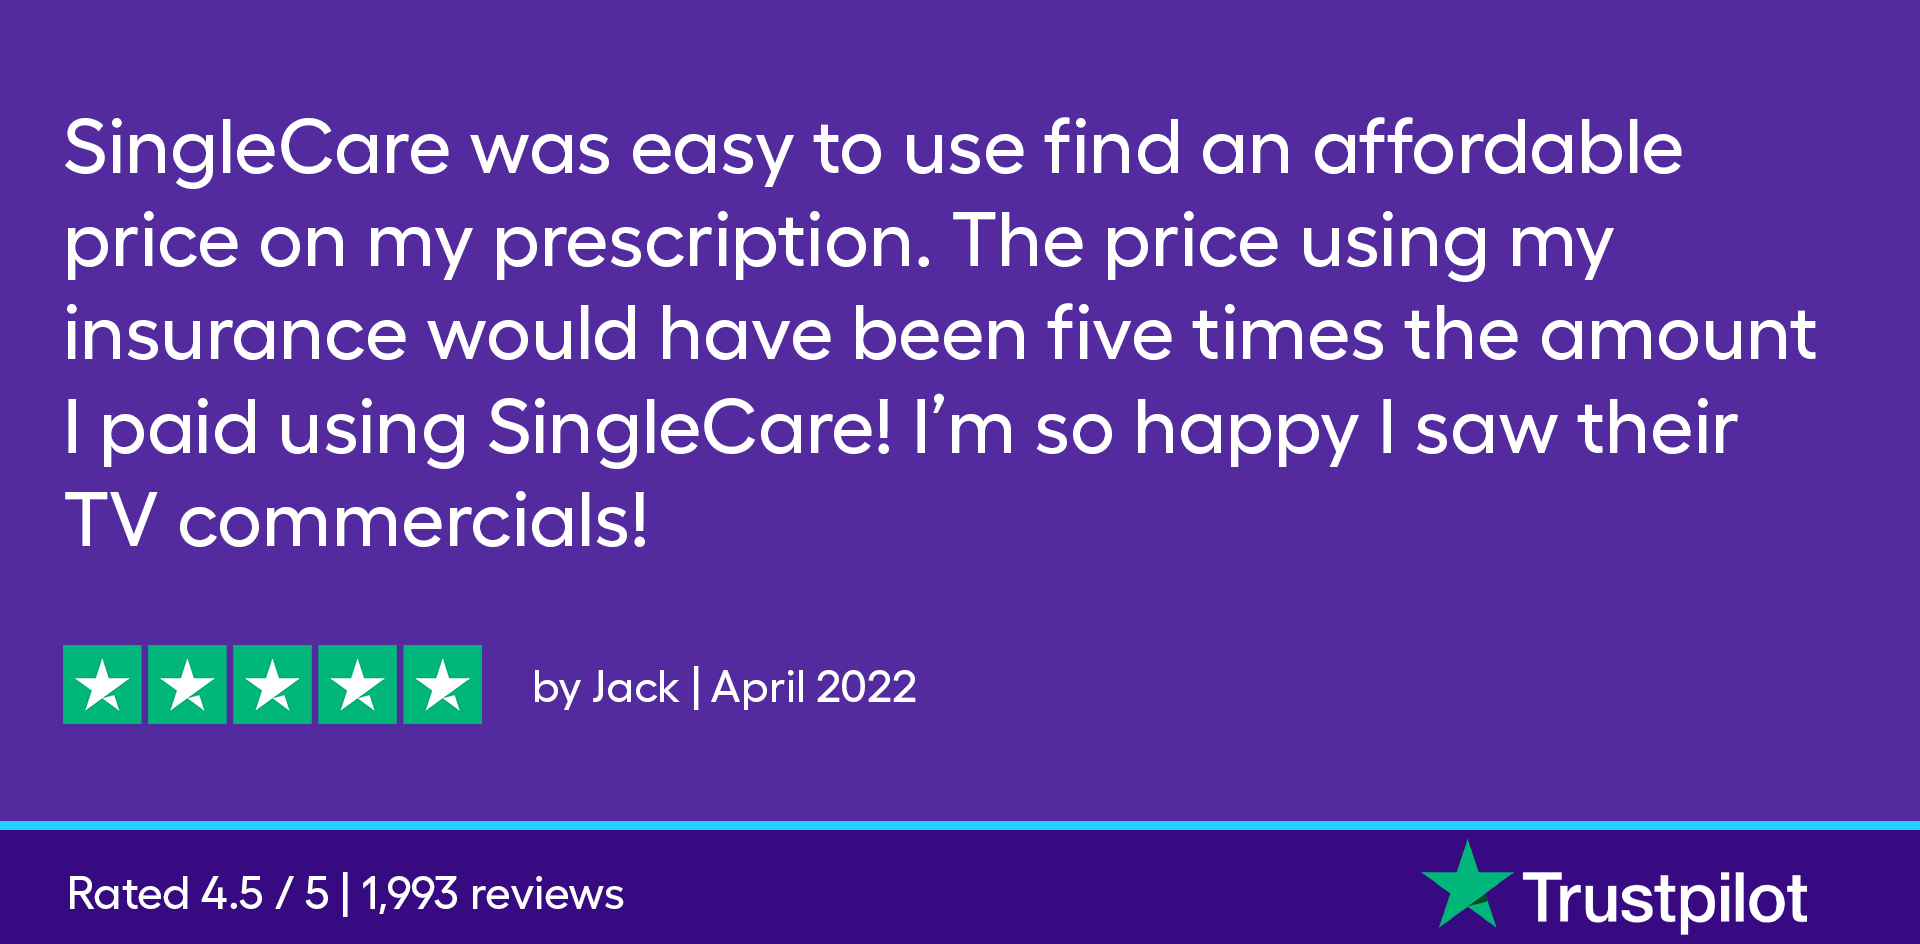 SingleCare was easy to use and find an affordable price on my prescription. The price using my insurance would have been five times the amount I paid using SingleCare! I'm so happy I saw their TV commercials!